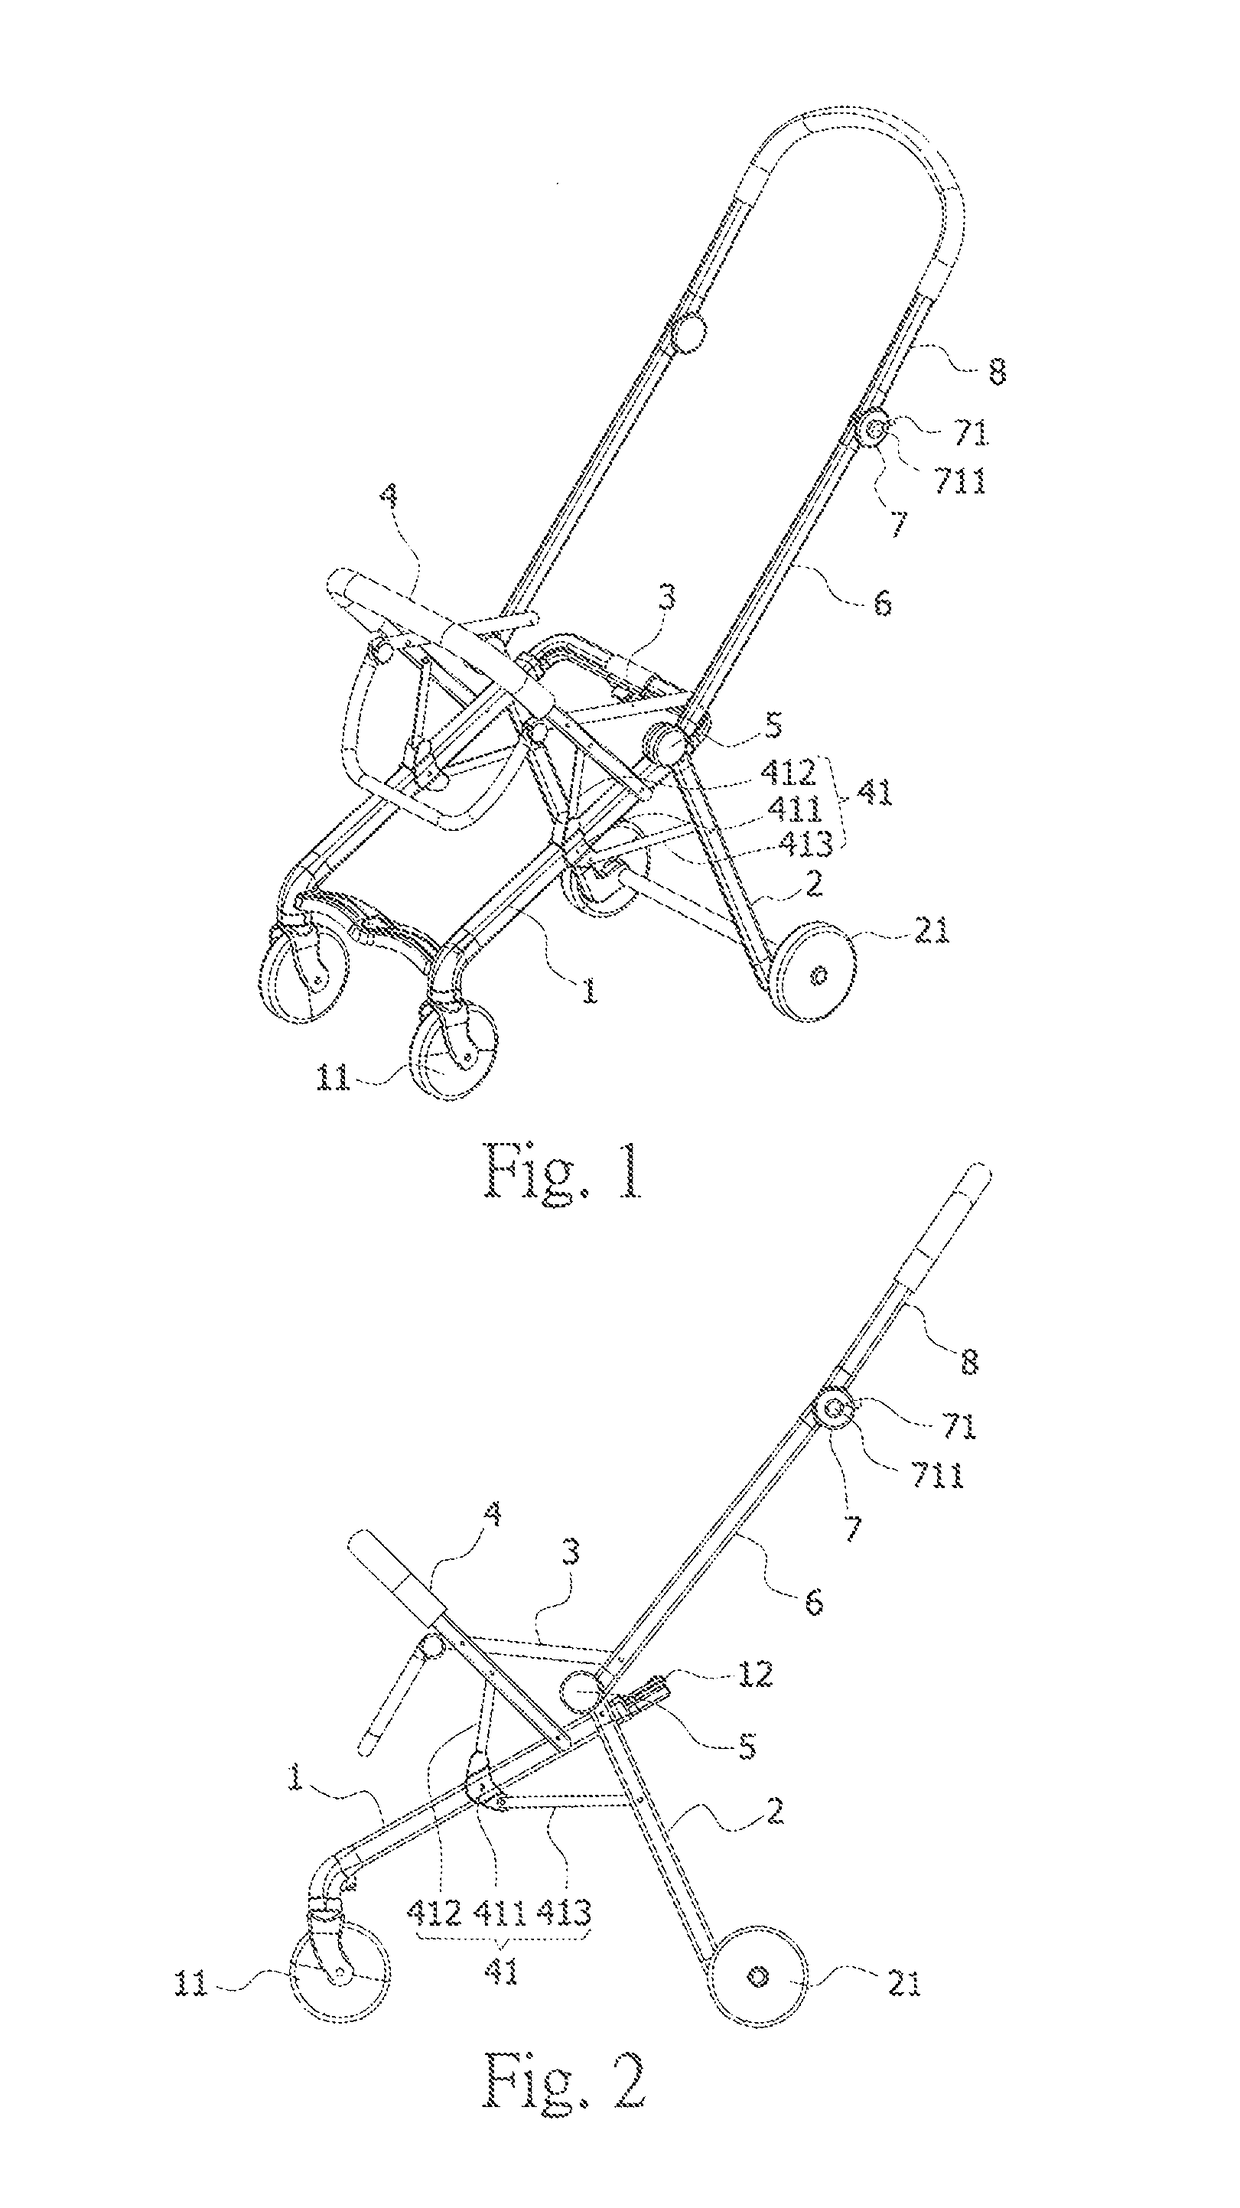 Foldable stroller to form a trolley